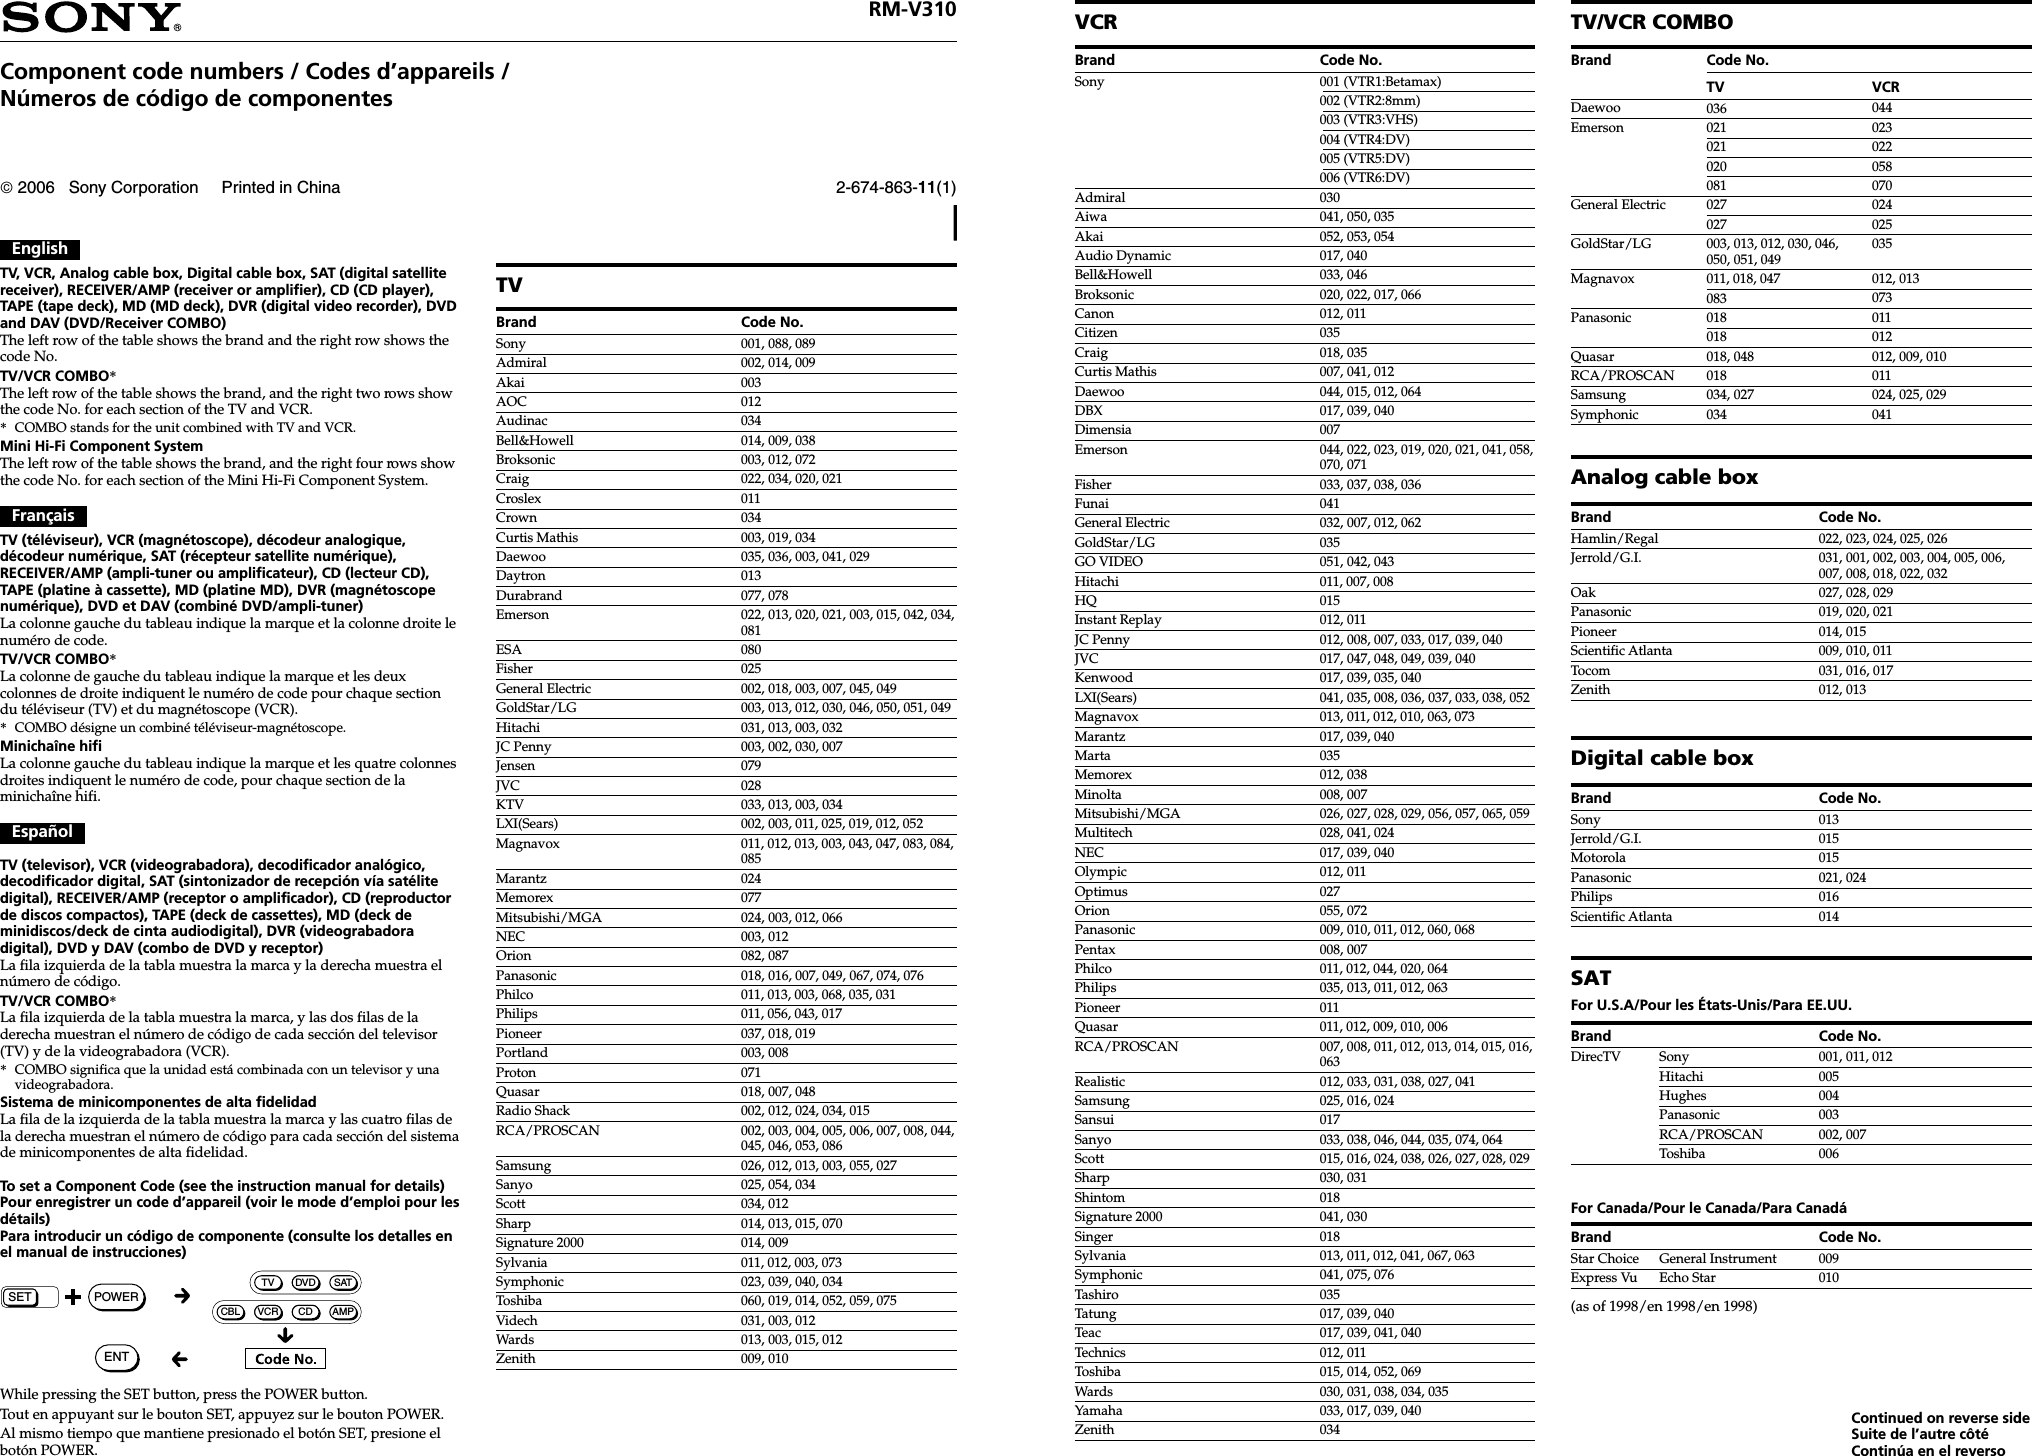 Page 1 of 2 - Sony RM-V310 User Manual Component Code Numbers RMV310 Codes